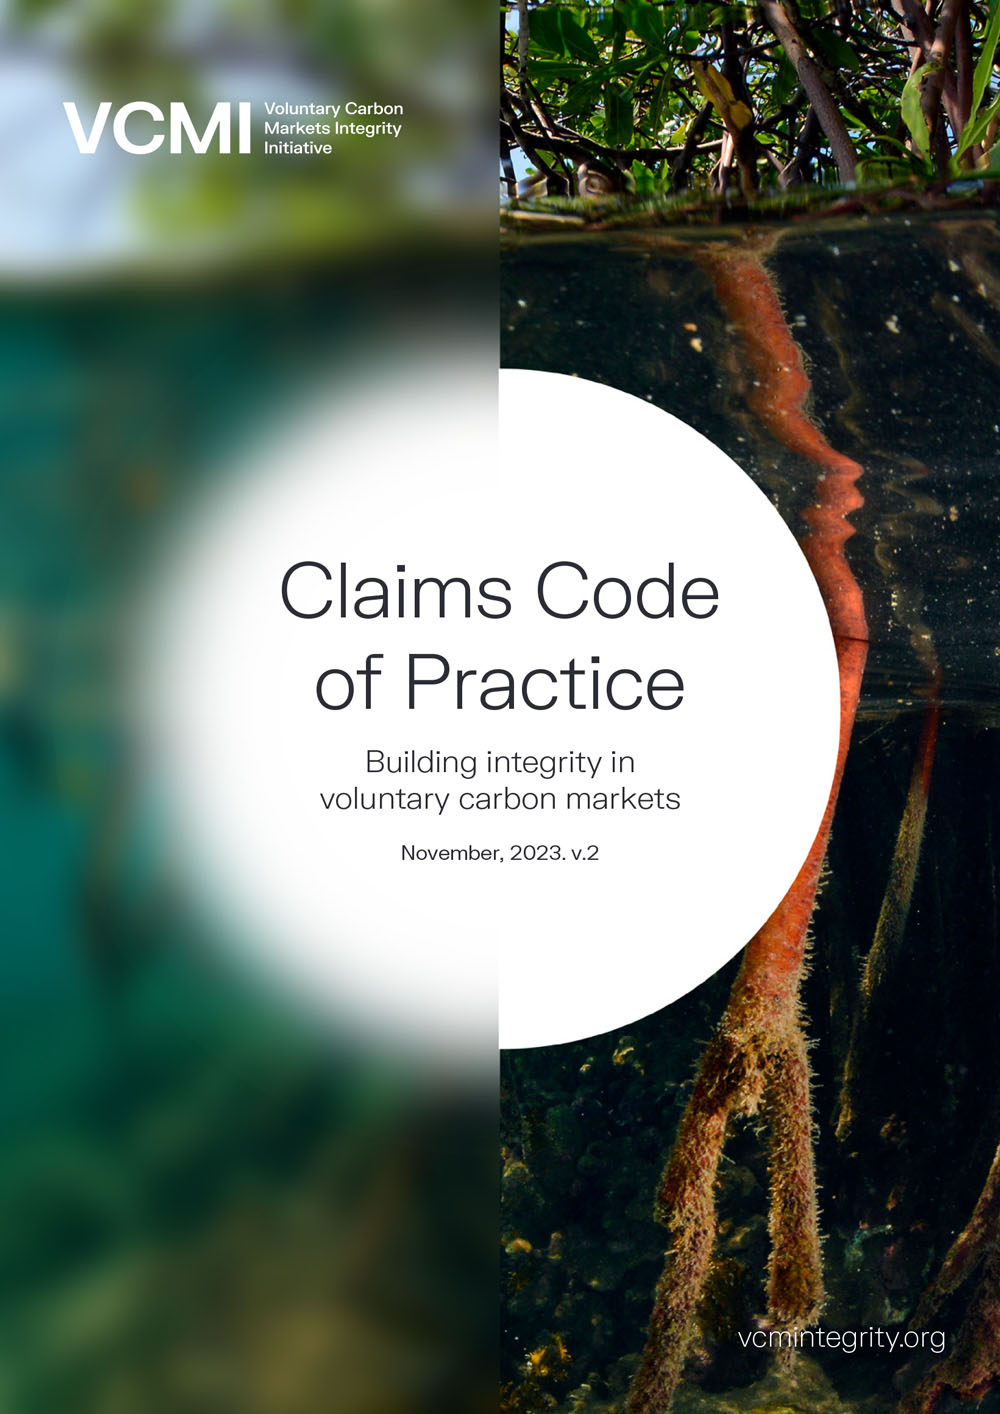 VCMI Claims Code of Practice  Additional guidance launching 28th